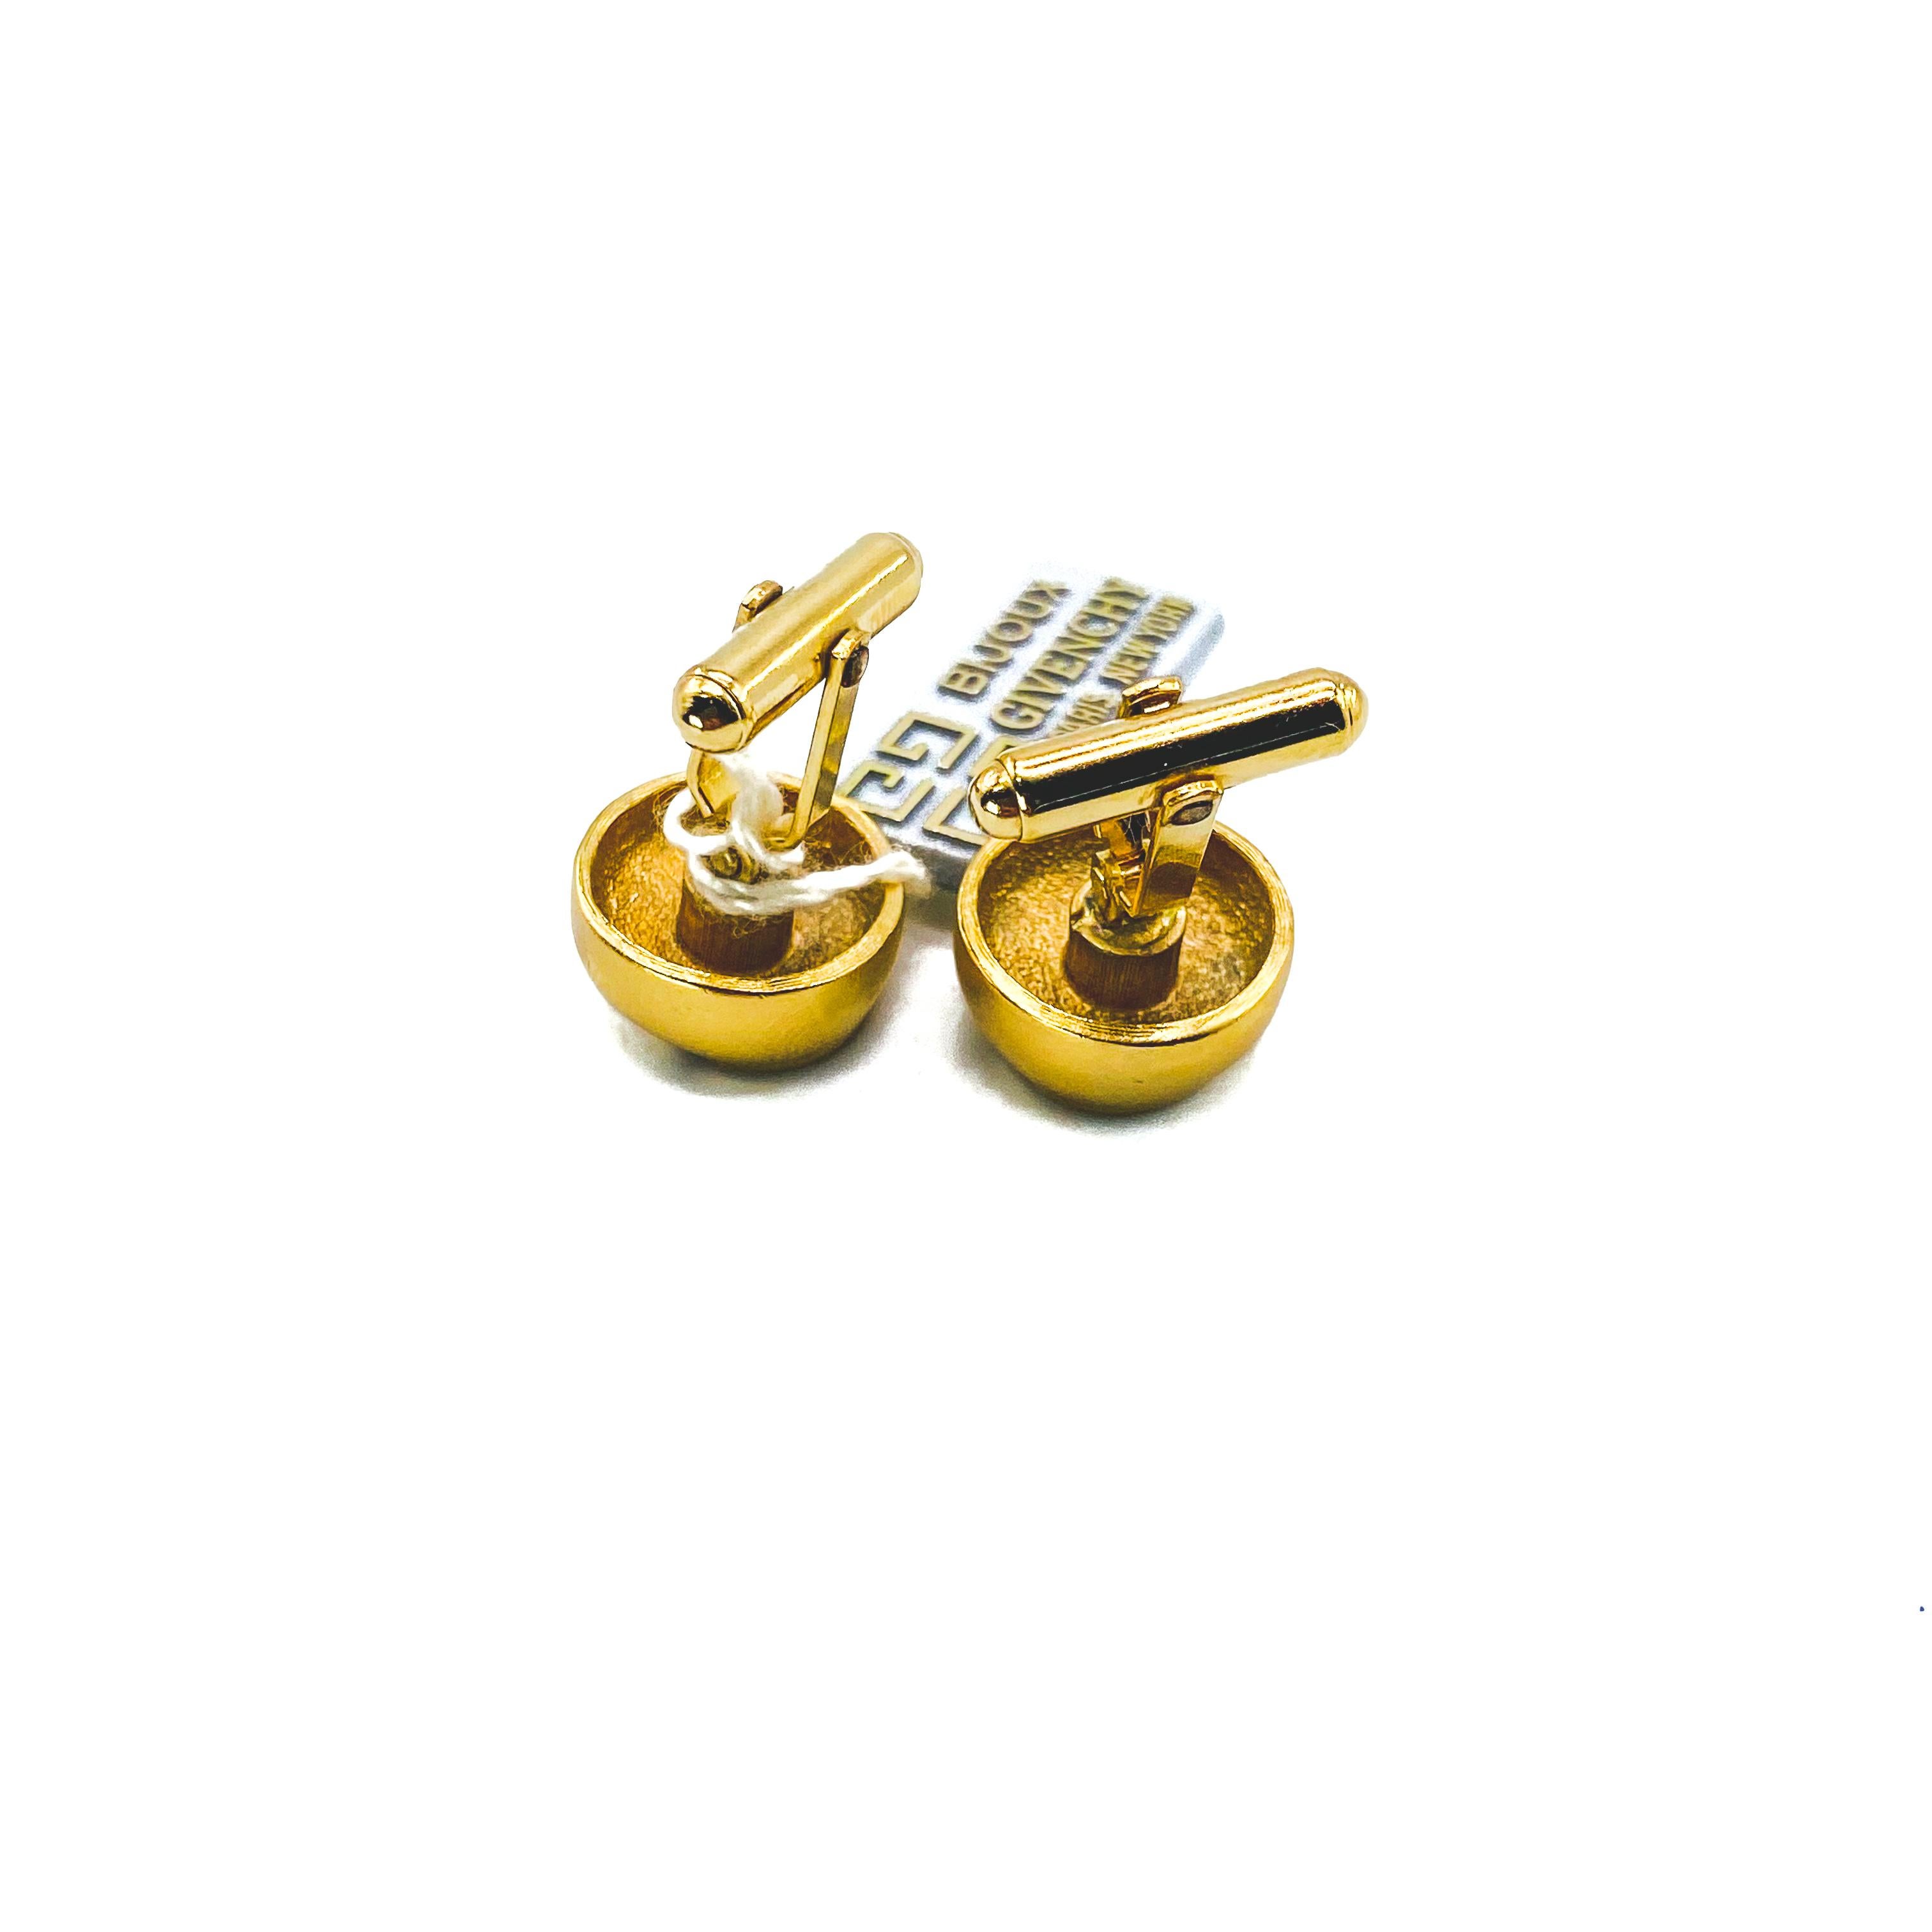 Women's or Men's Vintage GIVENCHY Gold Plated Cufflinks Vintage 1970s